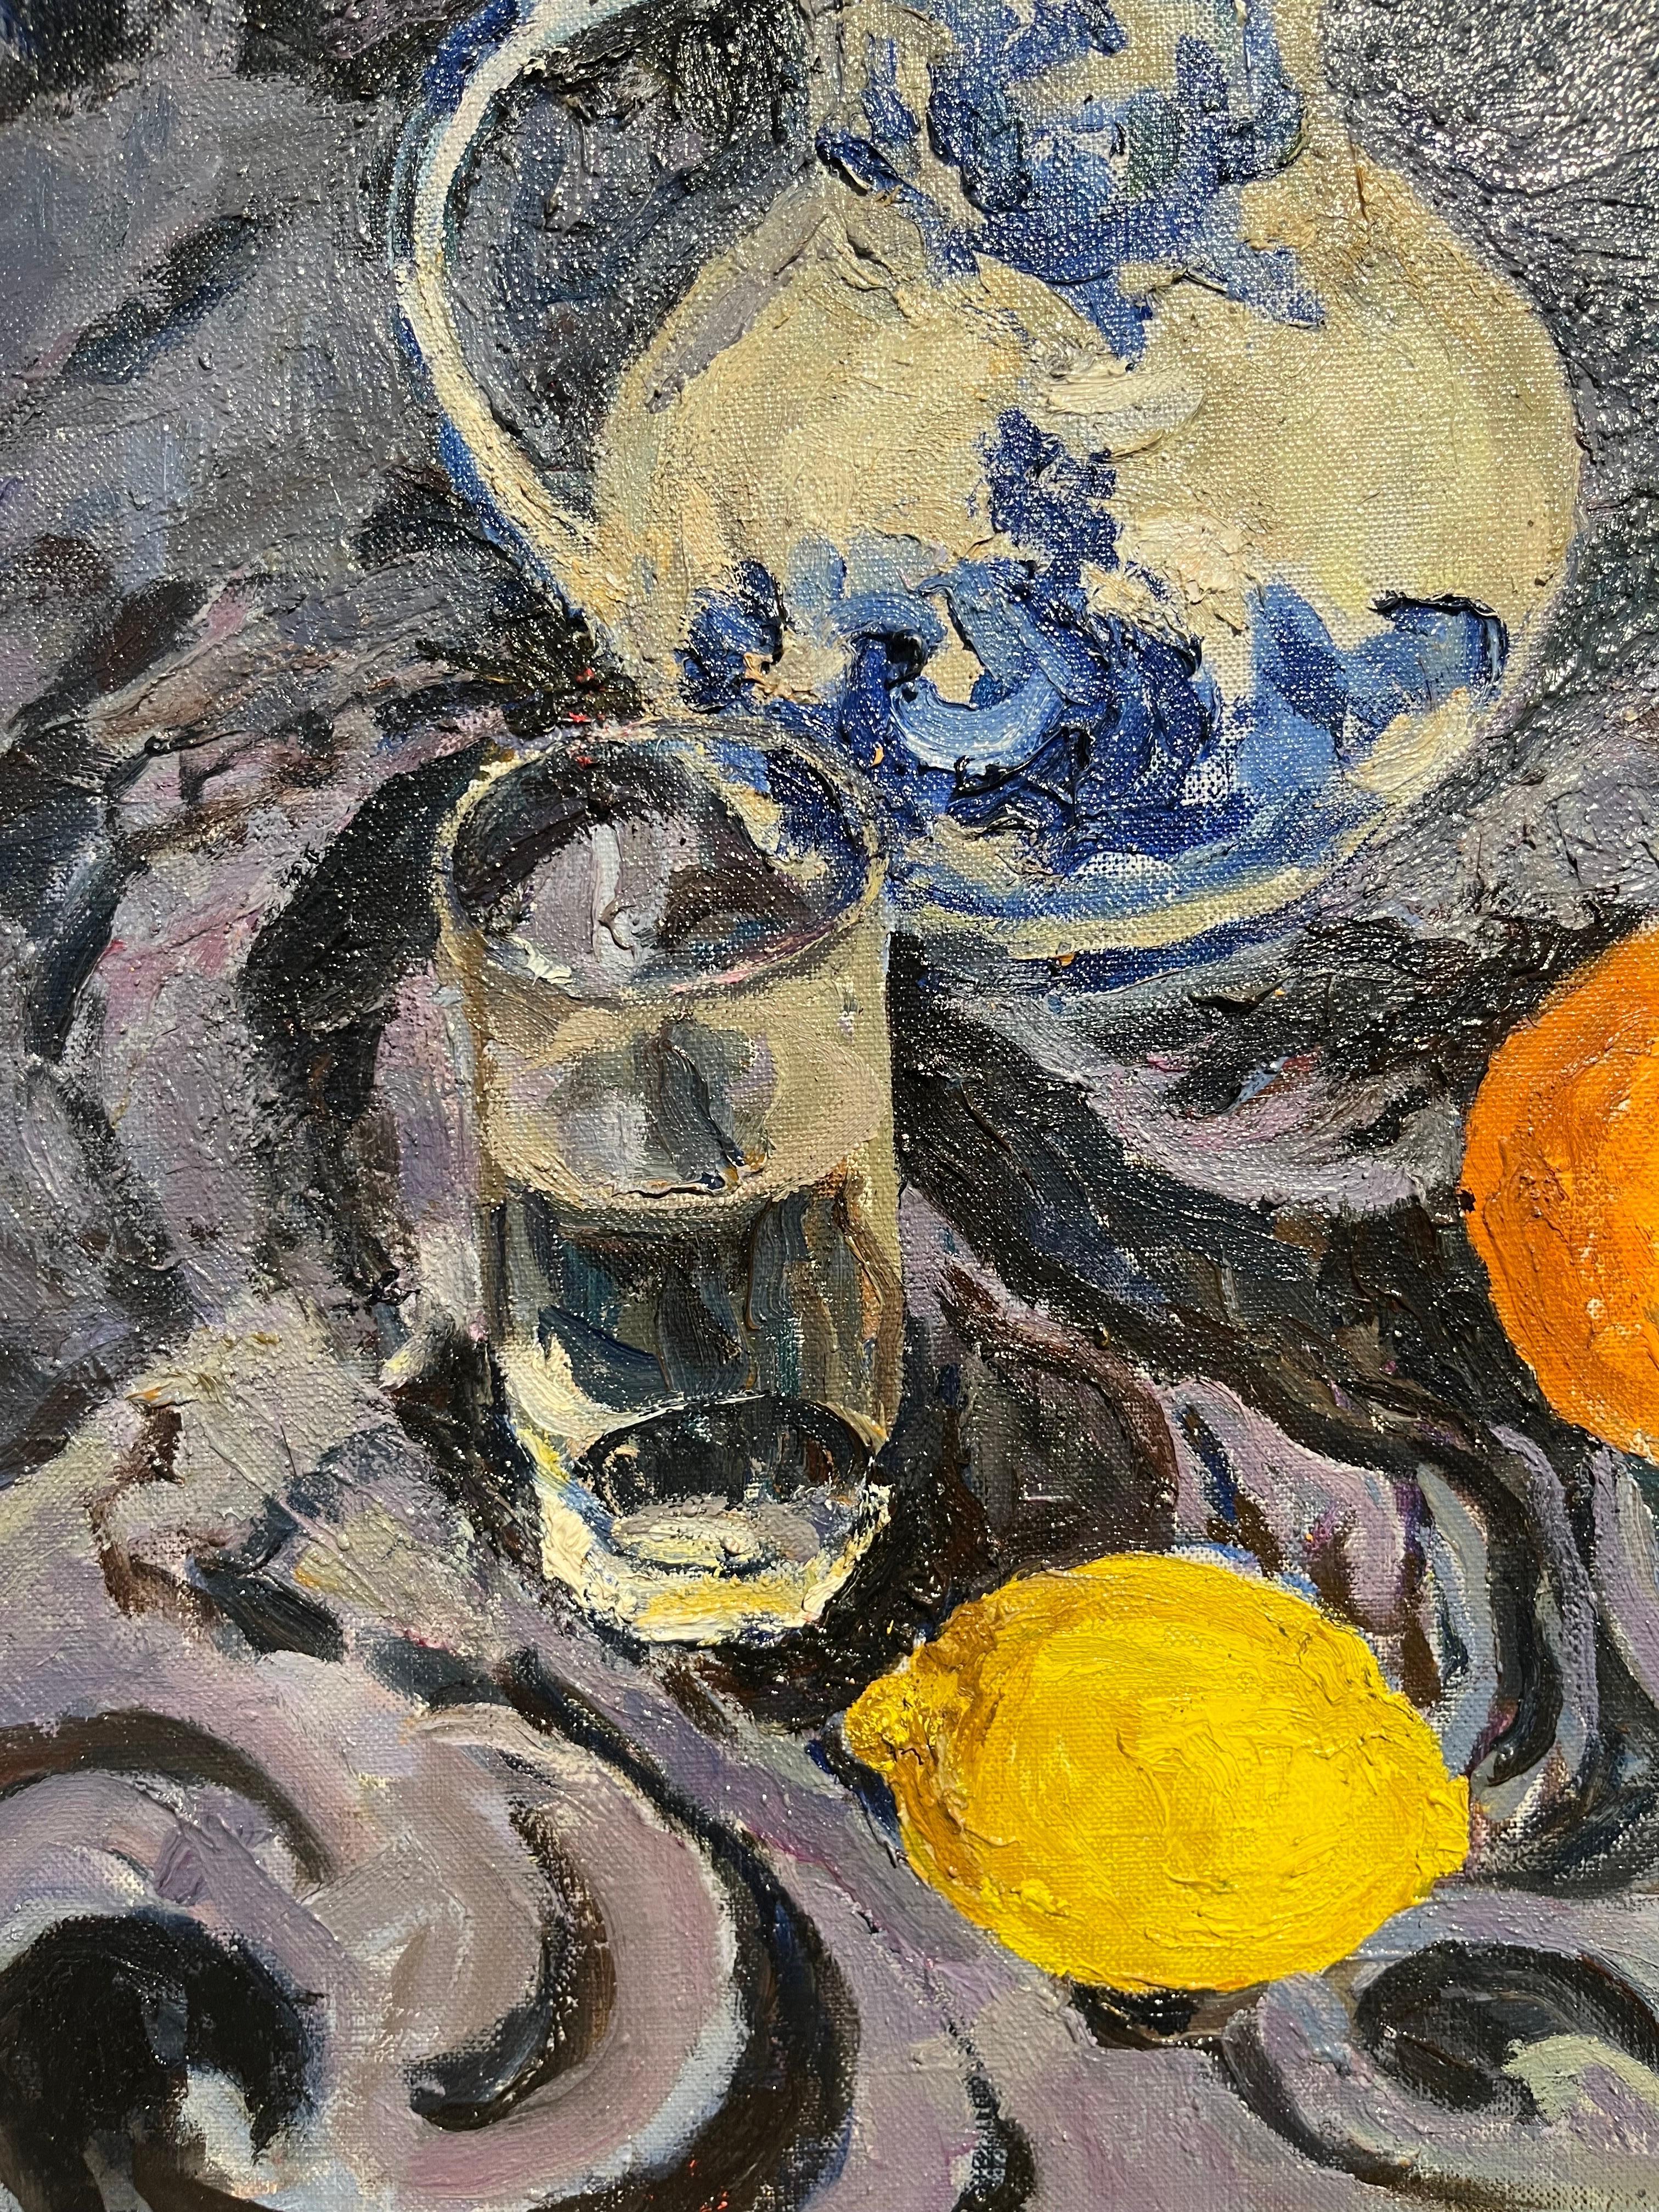 Still life , blue, yellow , orange ,Russian art,Lemon,
Published in a monographic catalogue

Maya kopitzeva’s works have been acquired by the Russian Ministry of Culture, by the Foundation for the Russian Culture, by various collectors in Europe,